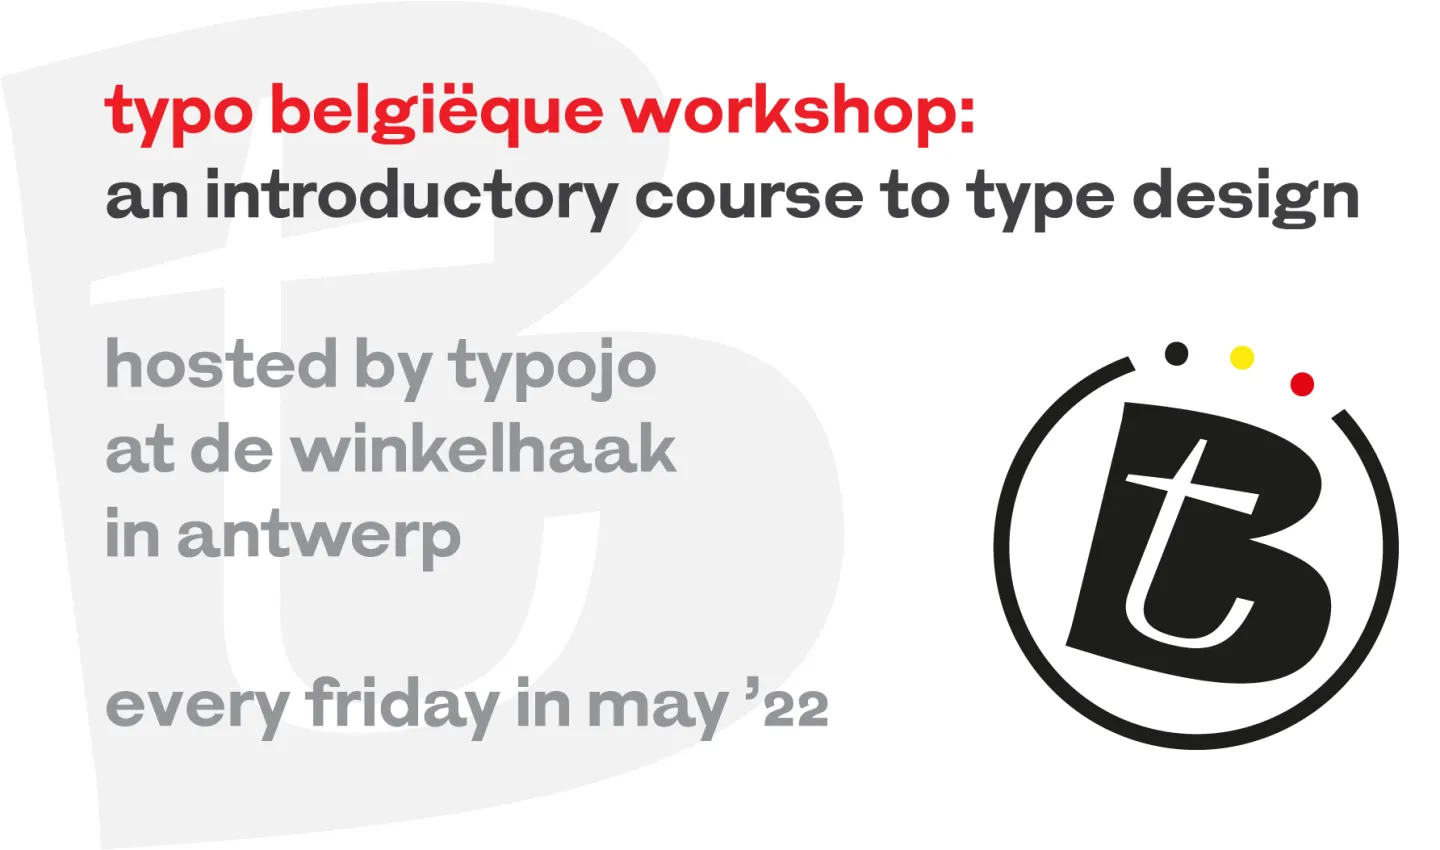 typo belgiëque workshop: an introductory course to type design 4/4